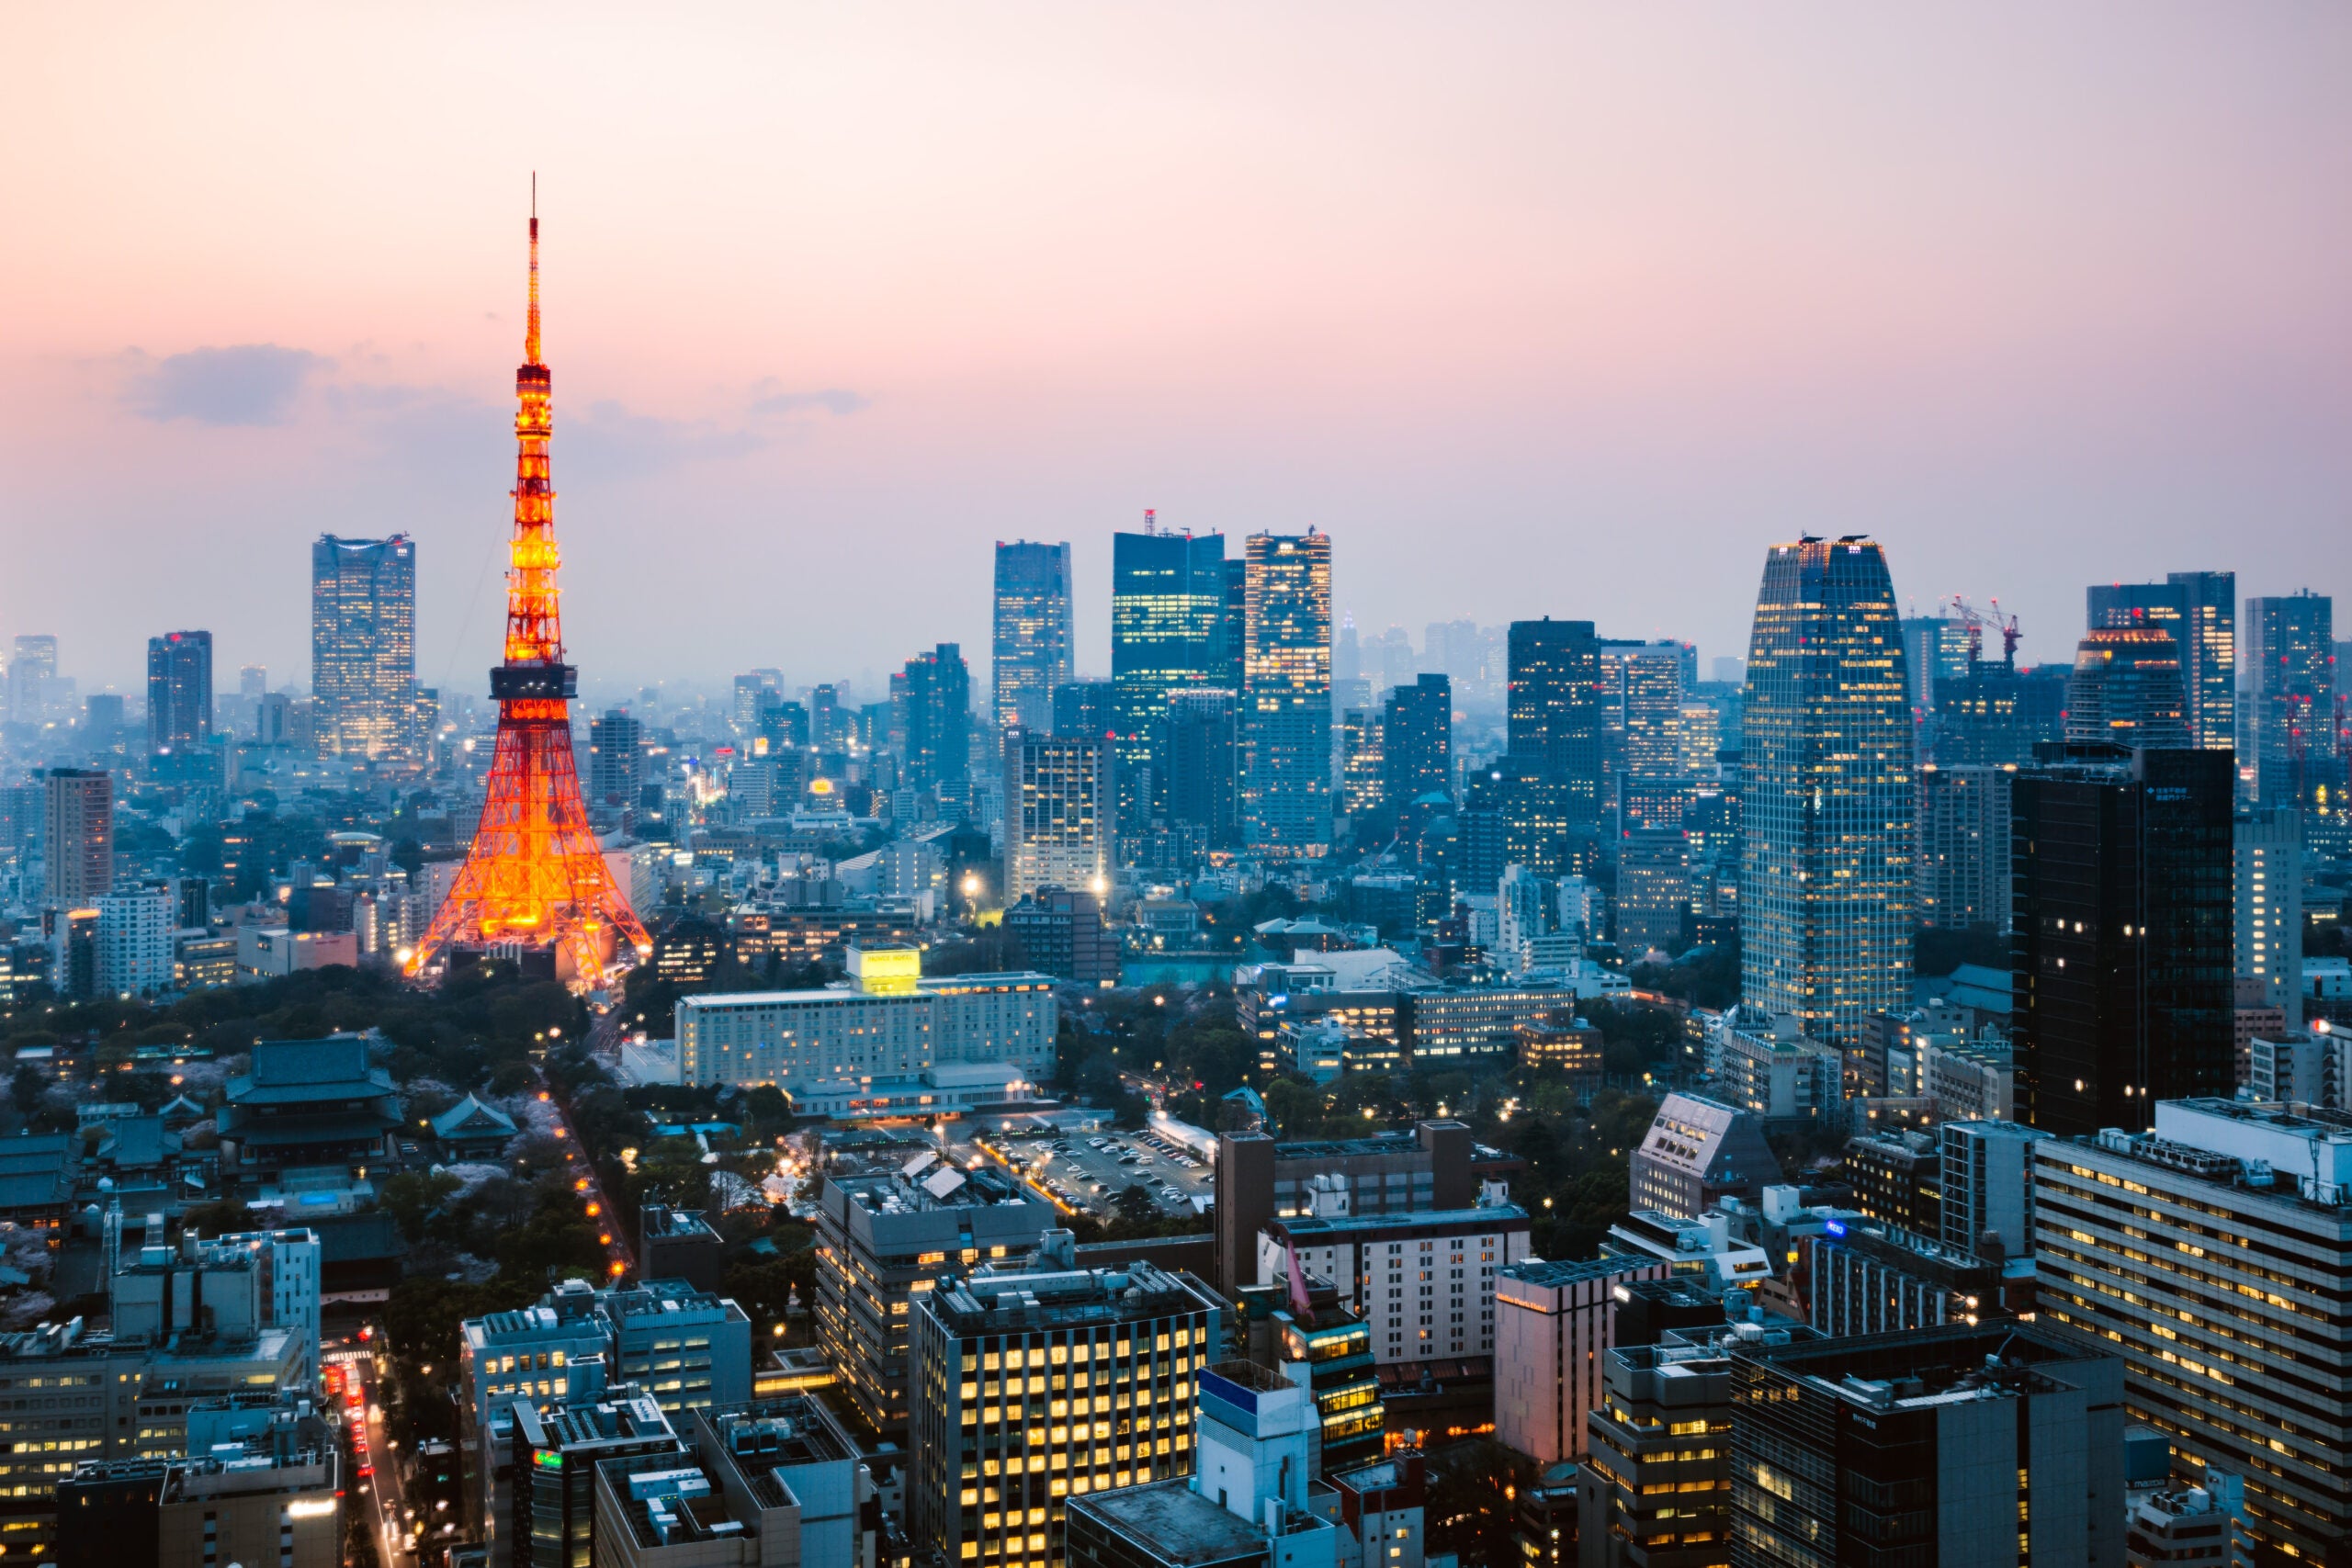 Japan deals: $555 in economy or ride in ANA's The Room for $2,700